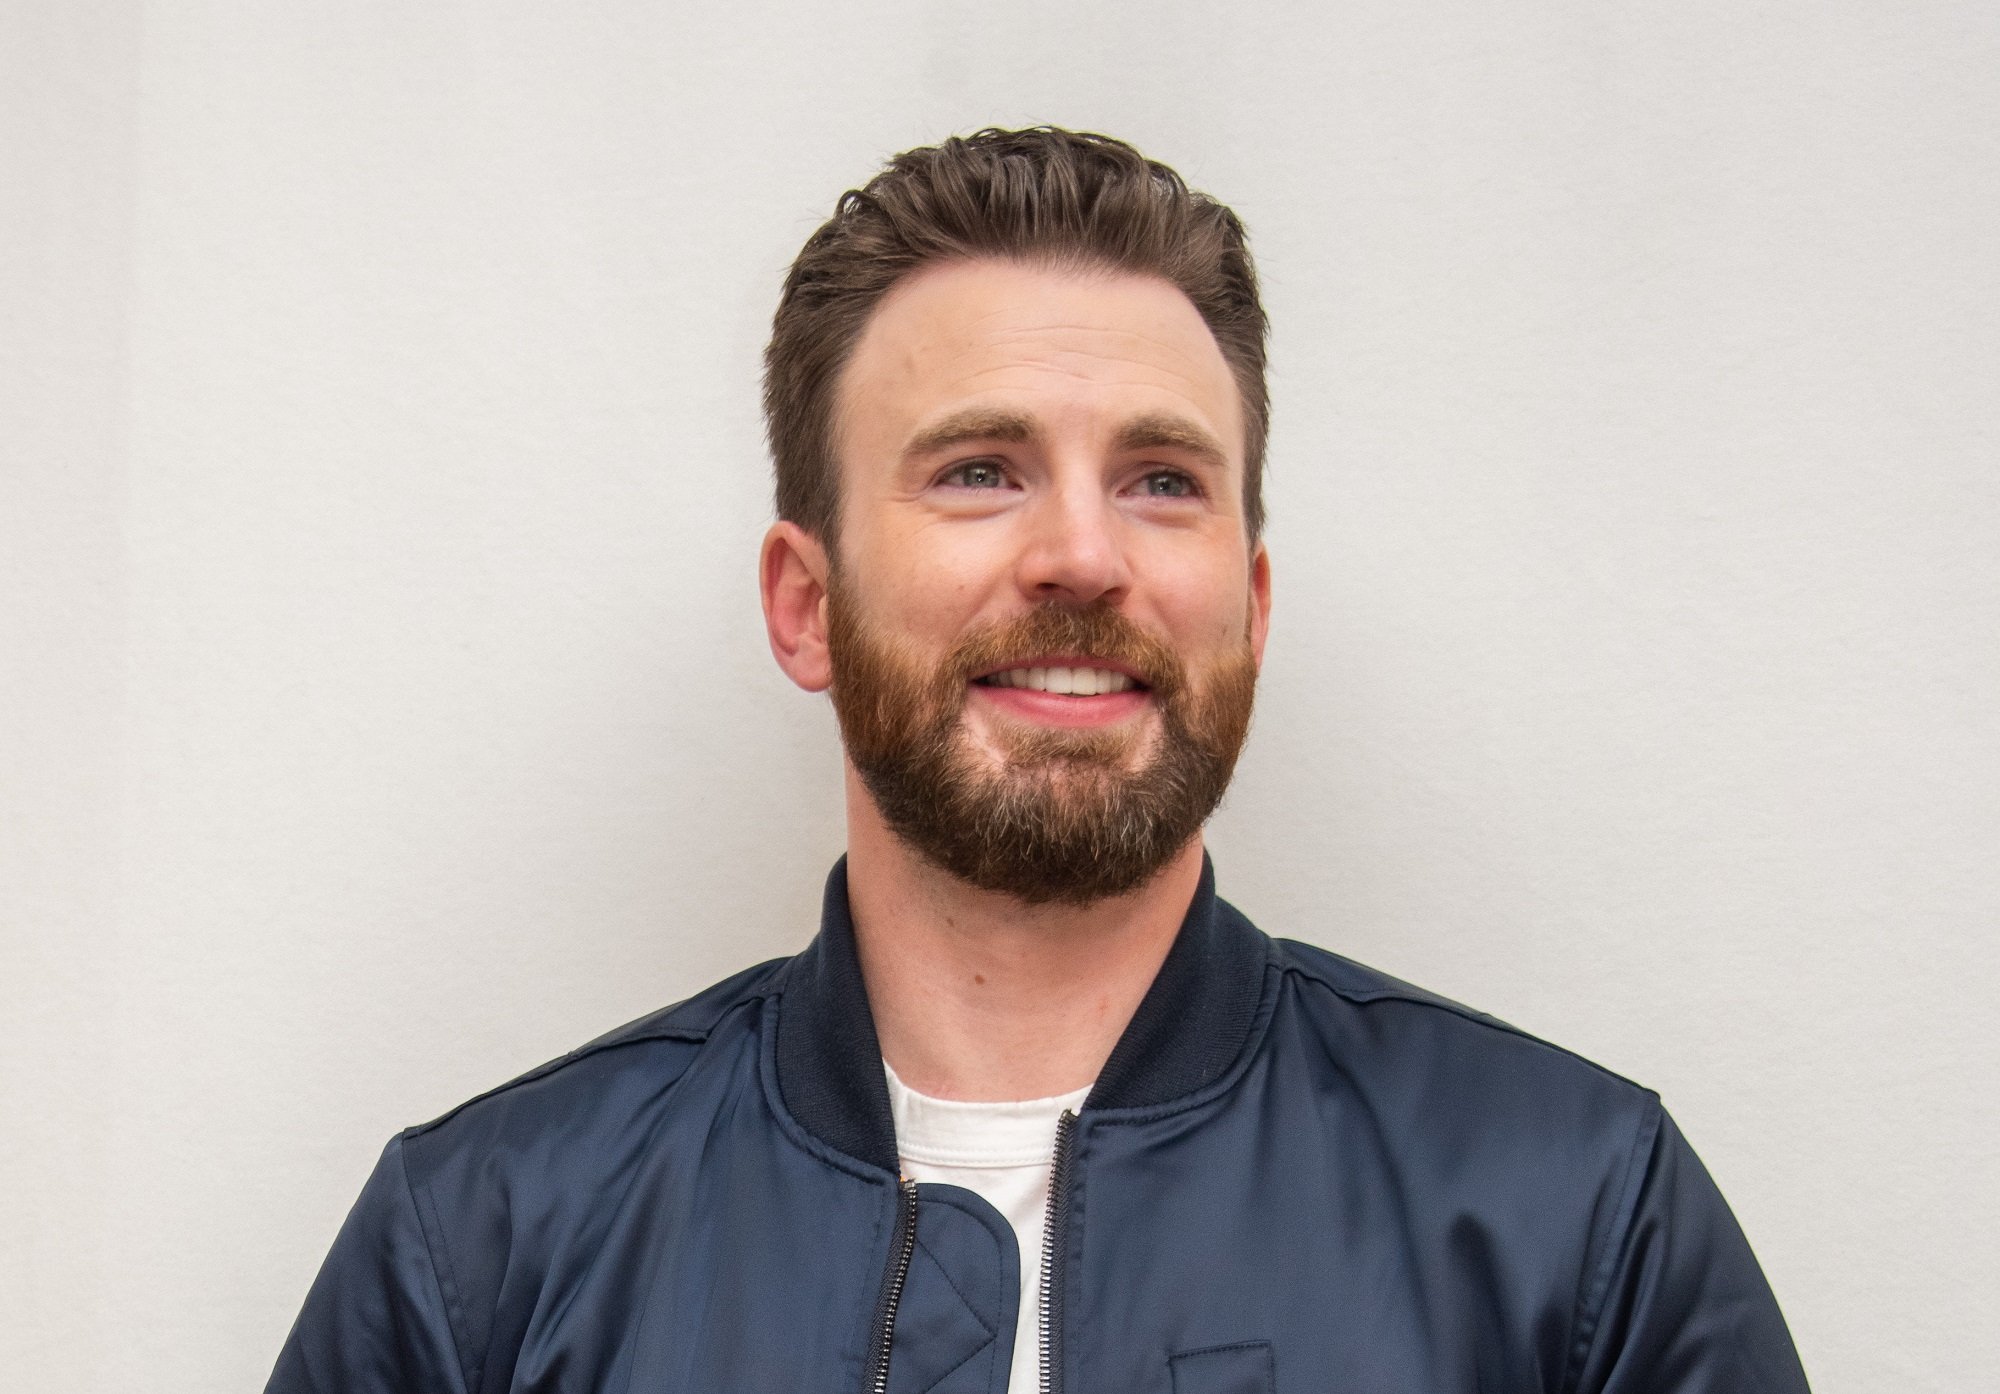 Chris Evans at the 'Knives Out' Press Conference at the Four Seasons Hotel on November 15, 2019 in Beverly Hills, California. 